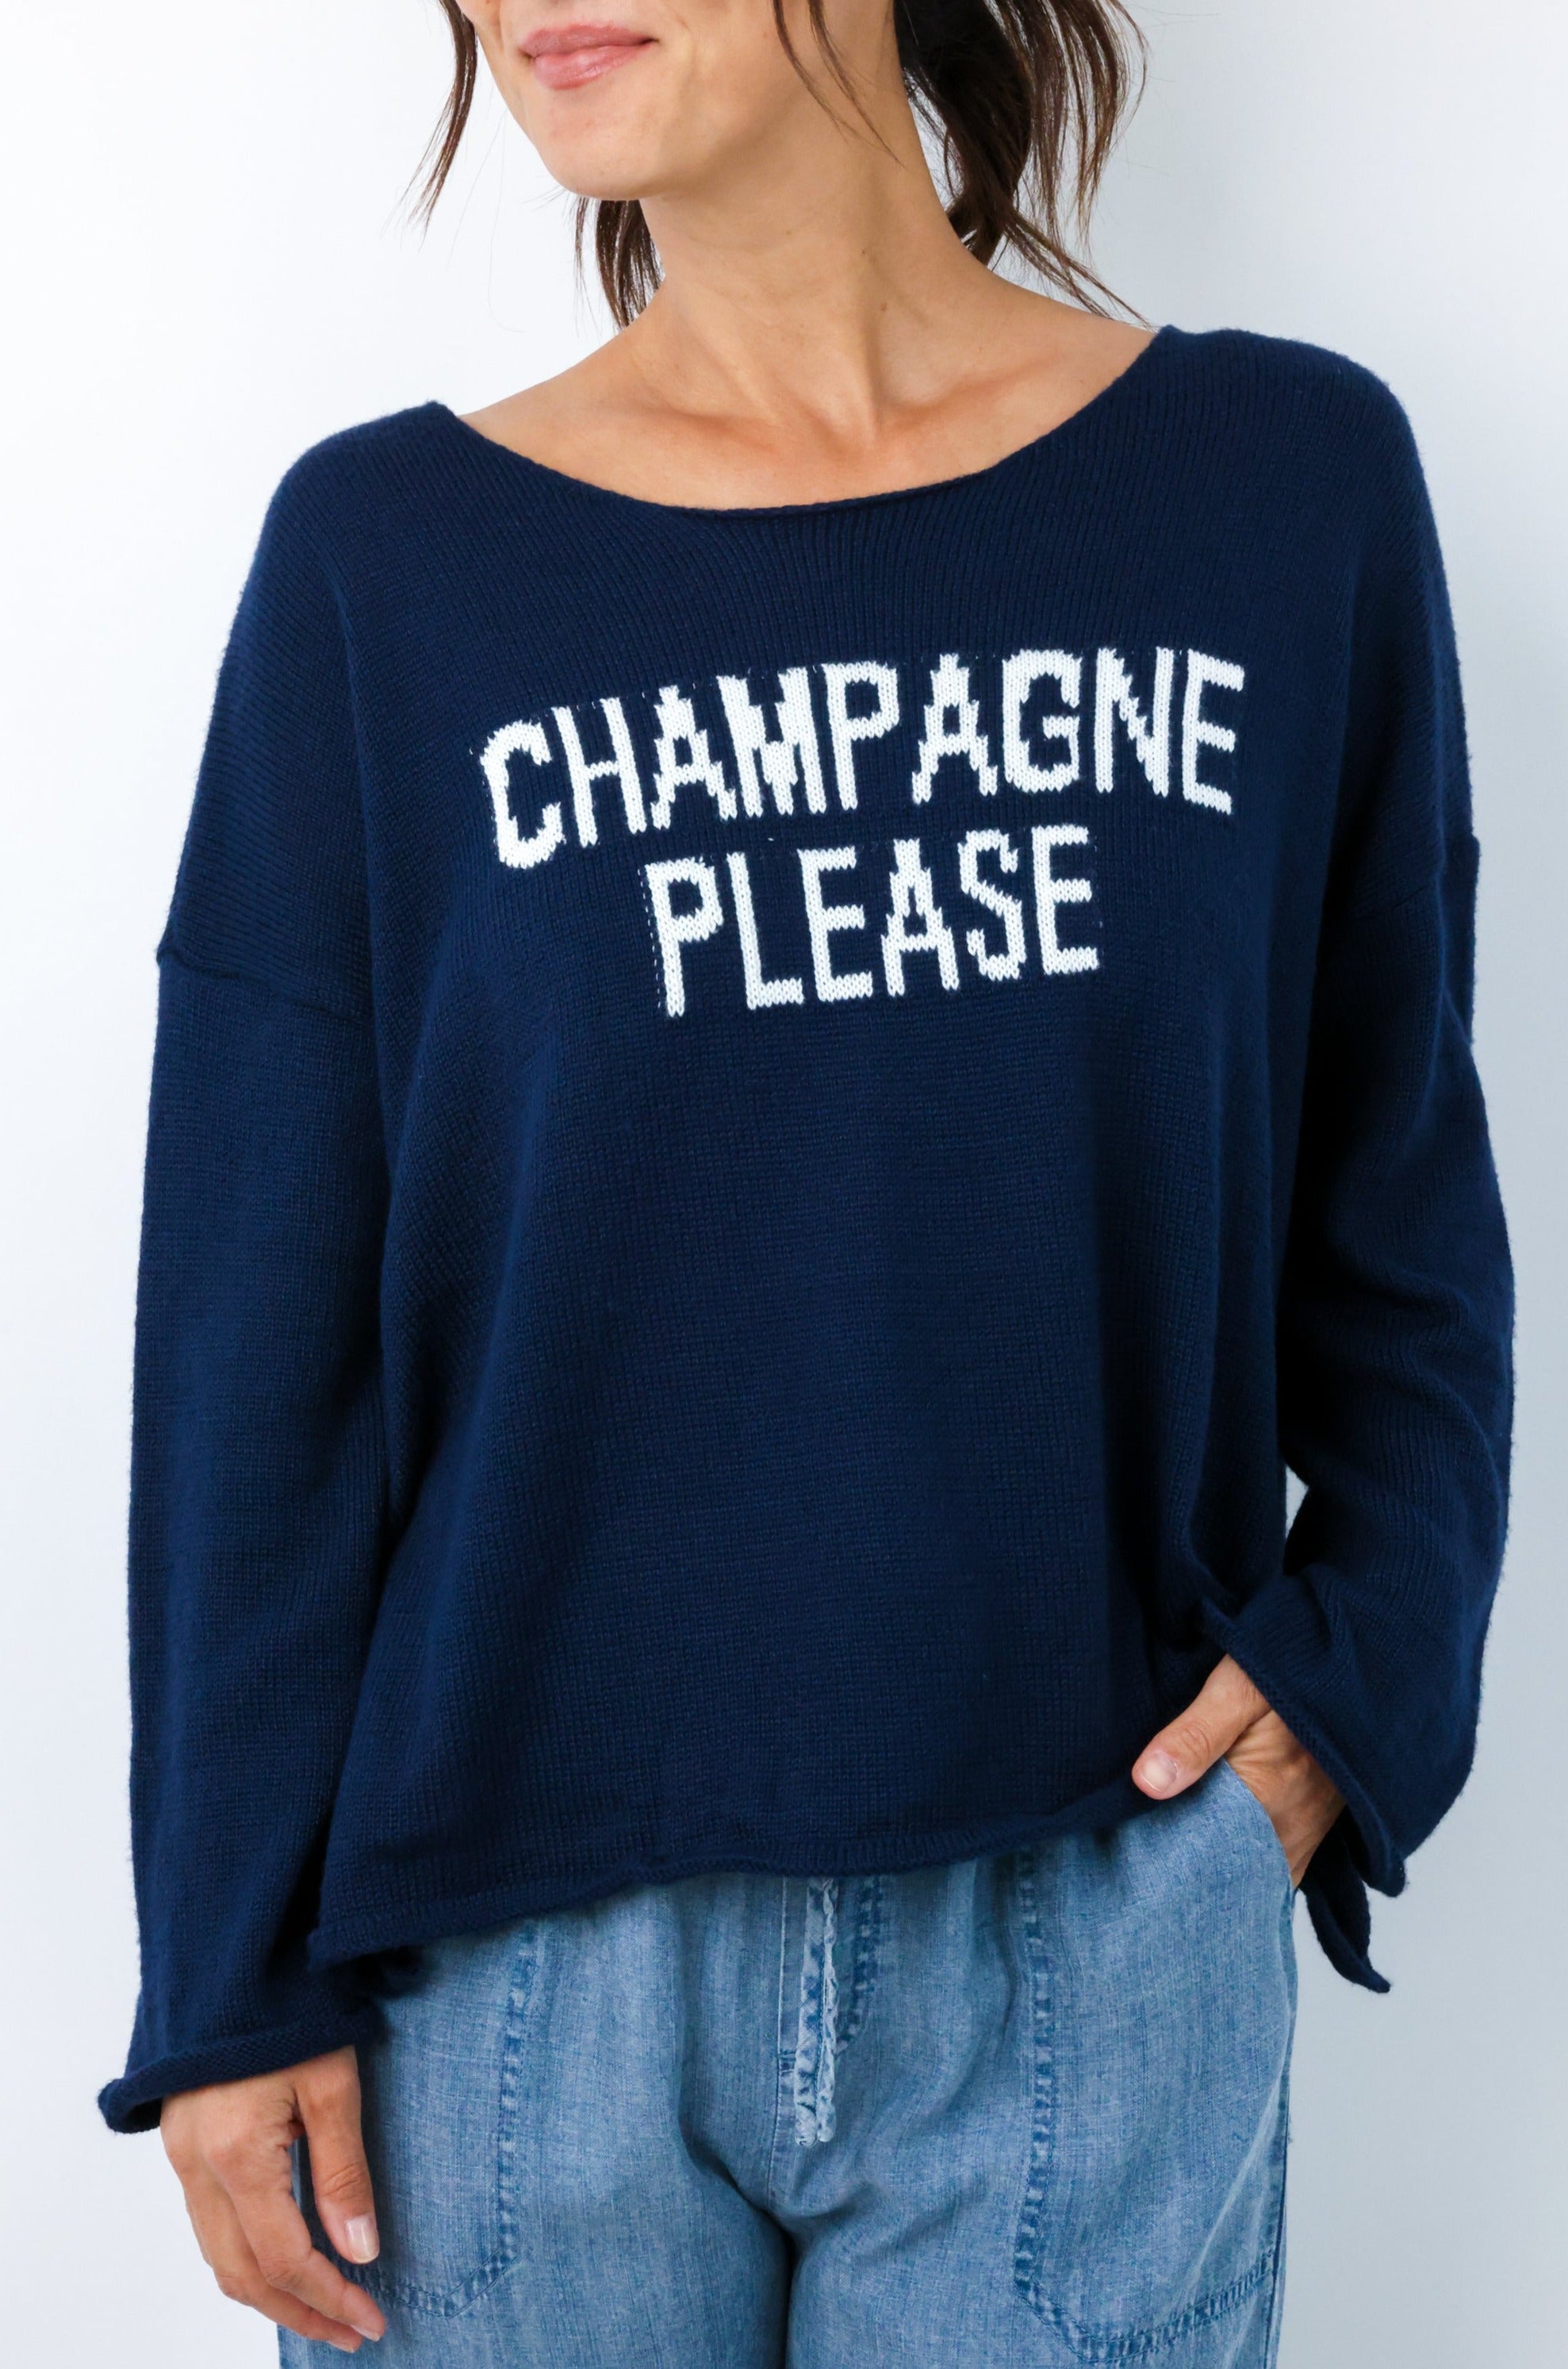 Champagne Please Sweater